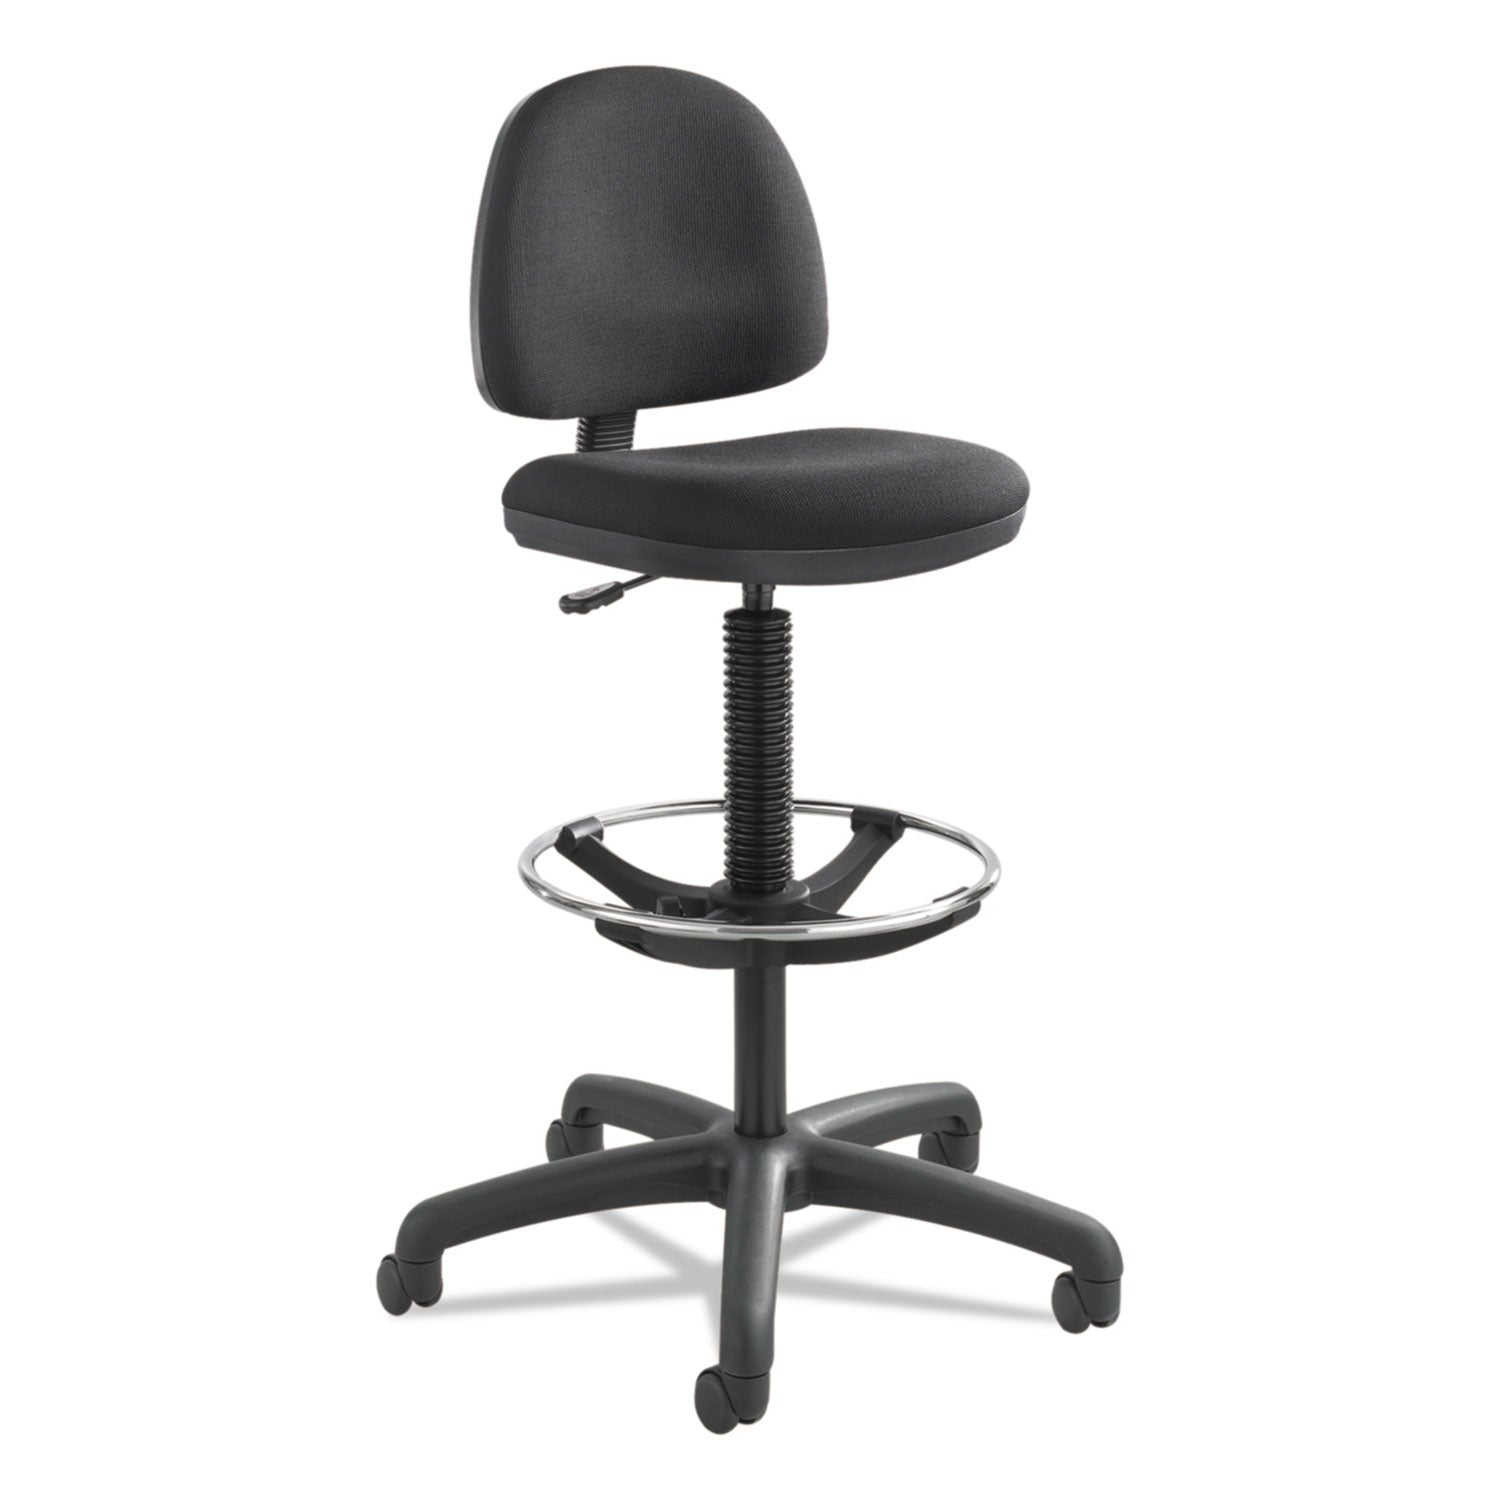 Precision Extended-Height Swivel Stool, Adjustable Footring, Supports Up to 250 lb, 23" to 33" Seat Height, Black Fabric - 